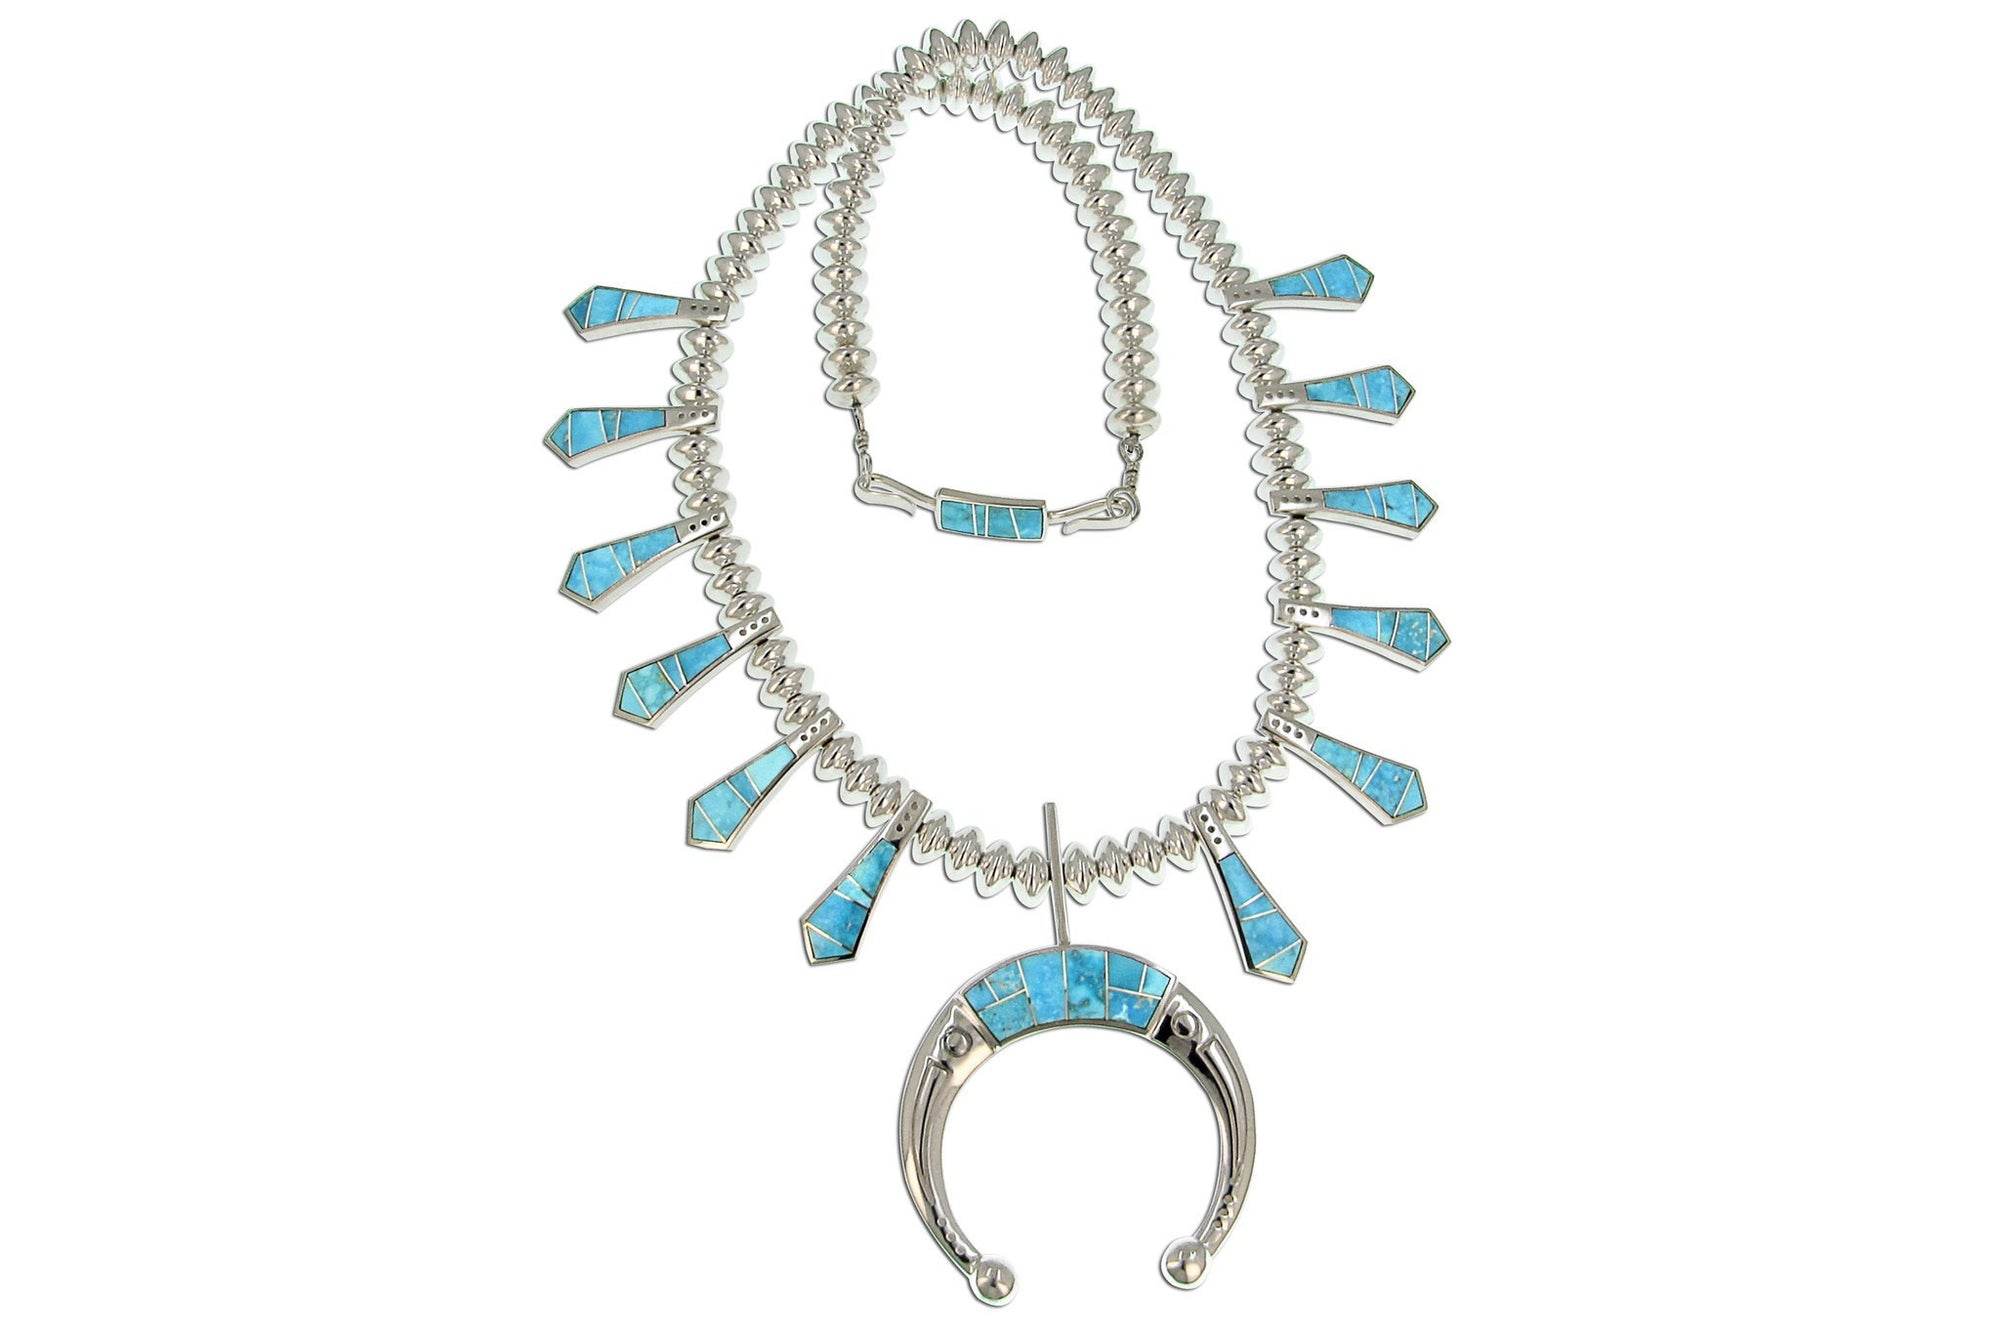 Native American Jewelry - David Rosales Inlaid Turquoise Squash Blossom Necklace